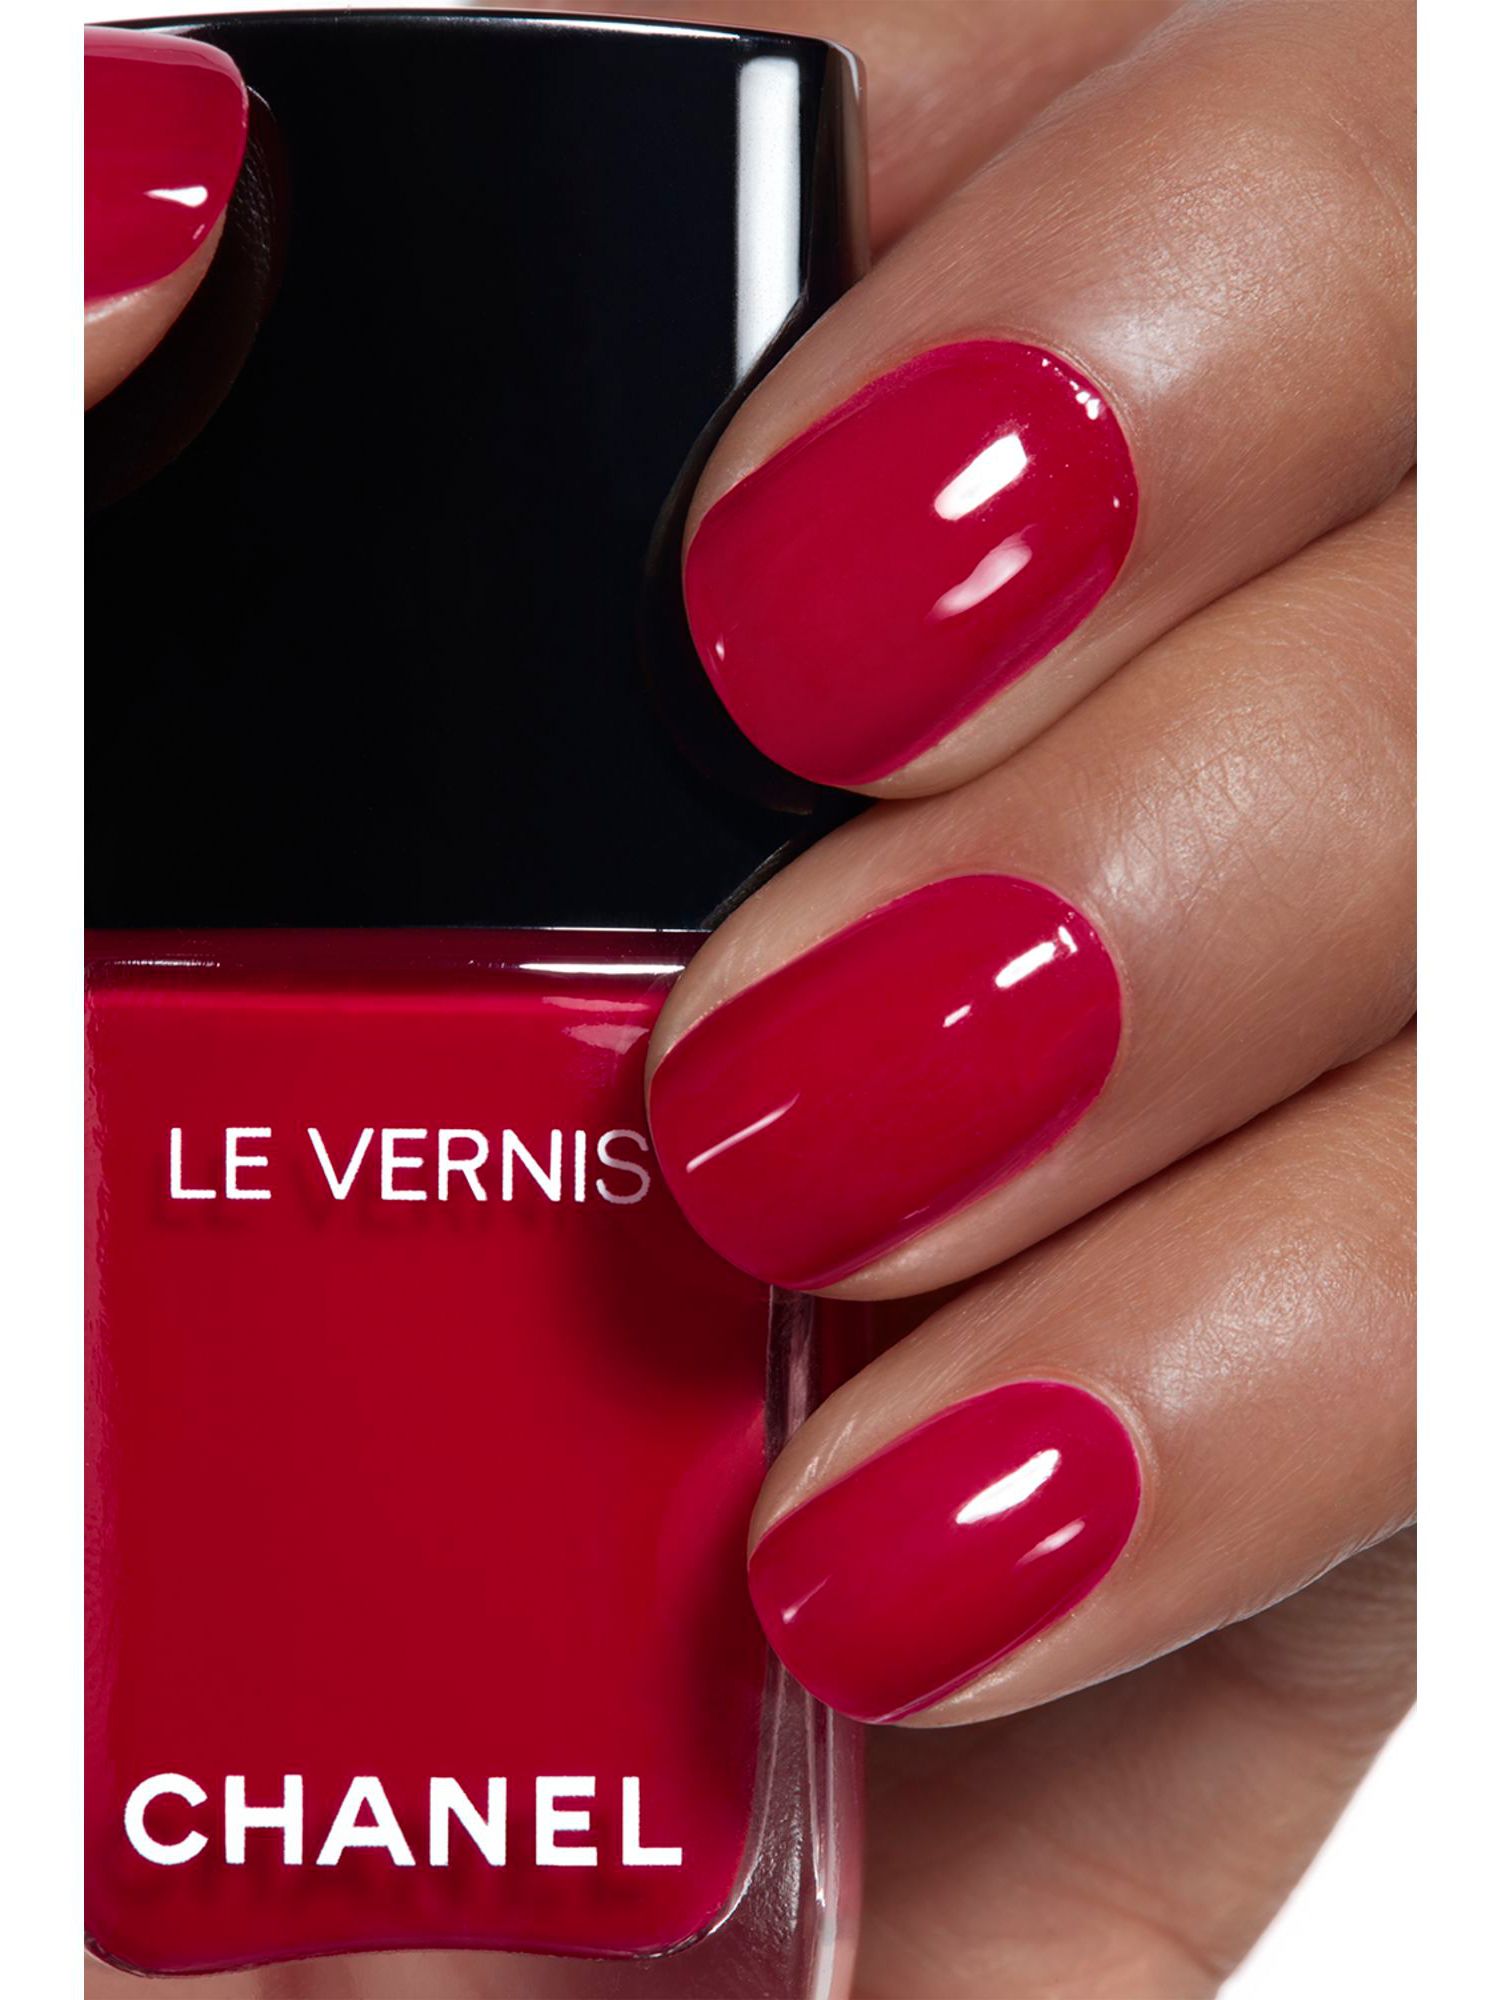 & 151 Le Vernis John Lewis CHANEL Nail Partners at Pirate Colour,